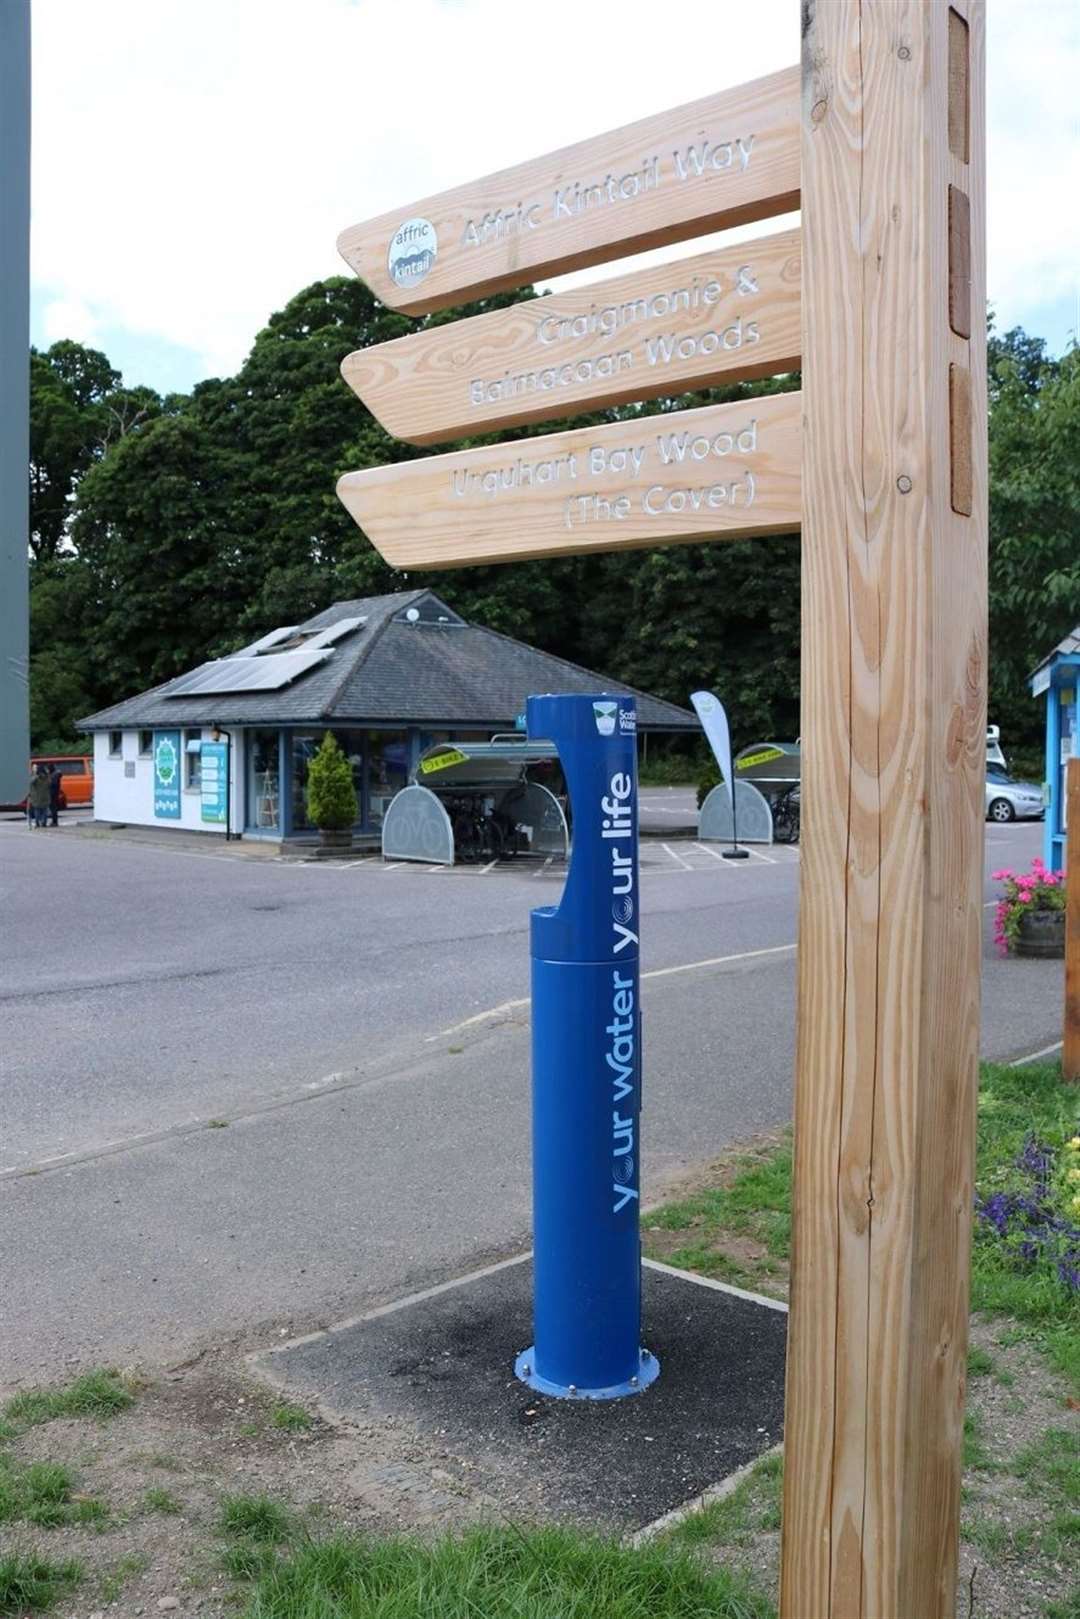 A Top up Tap has been turned on at the Loch Ness Hub.